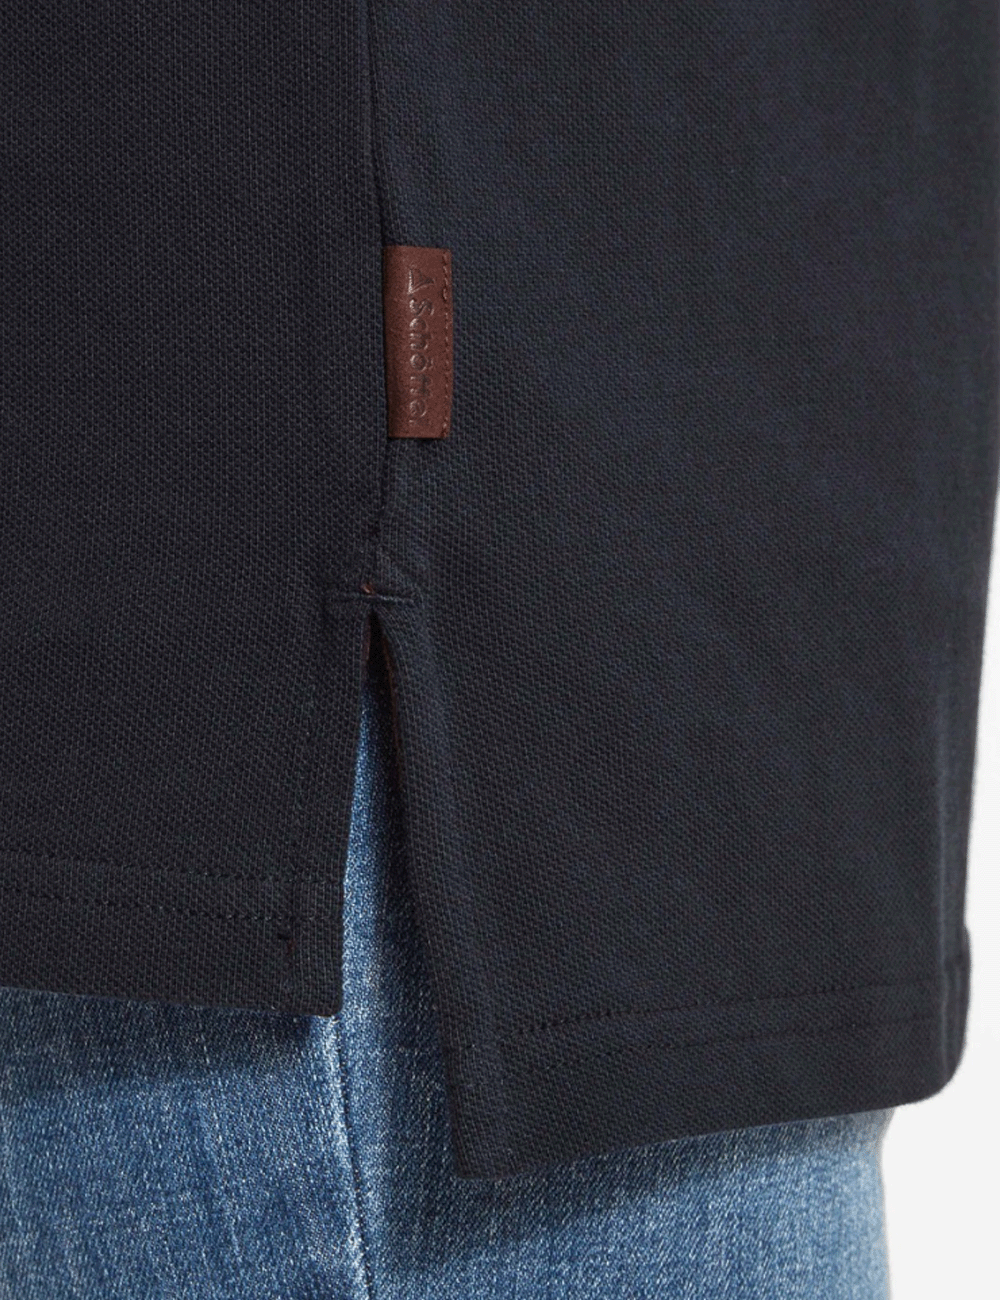 Close up of the Schoffel suede label on the seam of the Exeter Polo Shirt